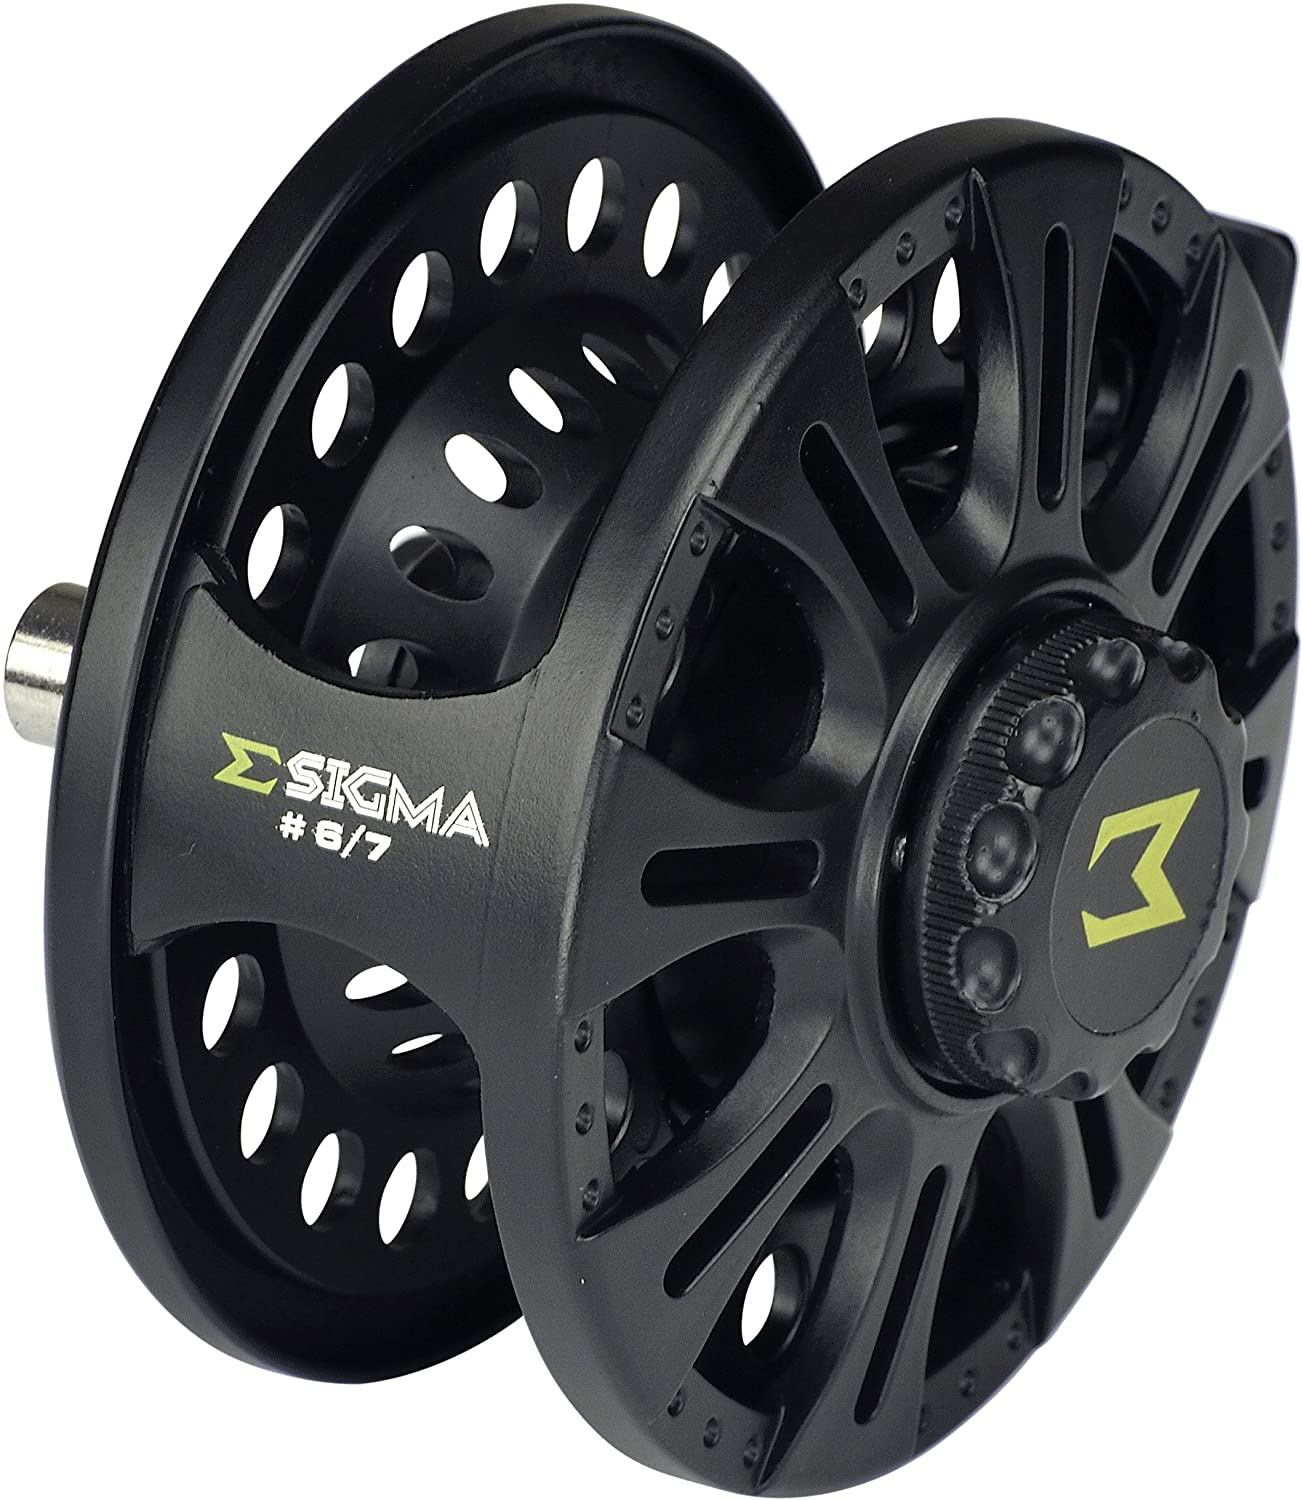 Shakespeare Sigma Fly Reels – Anglers World